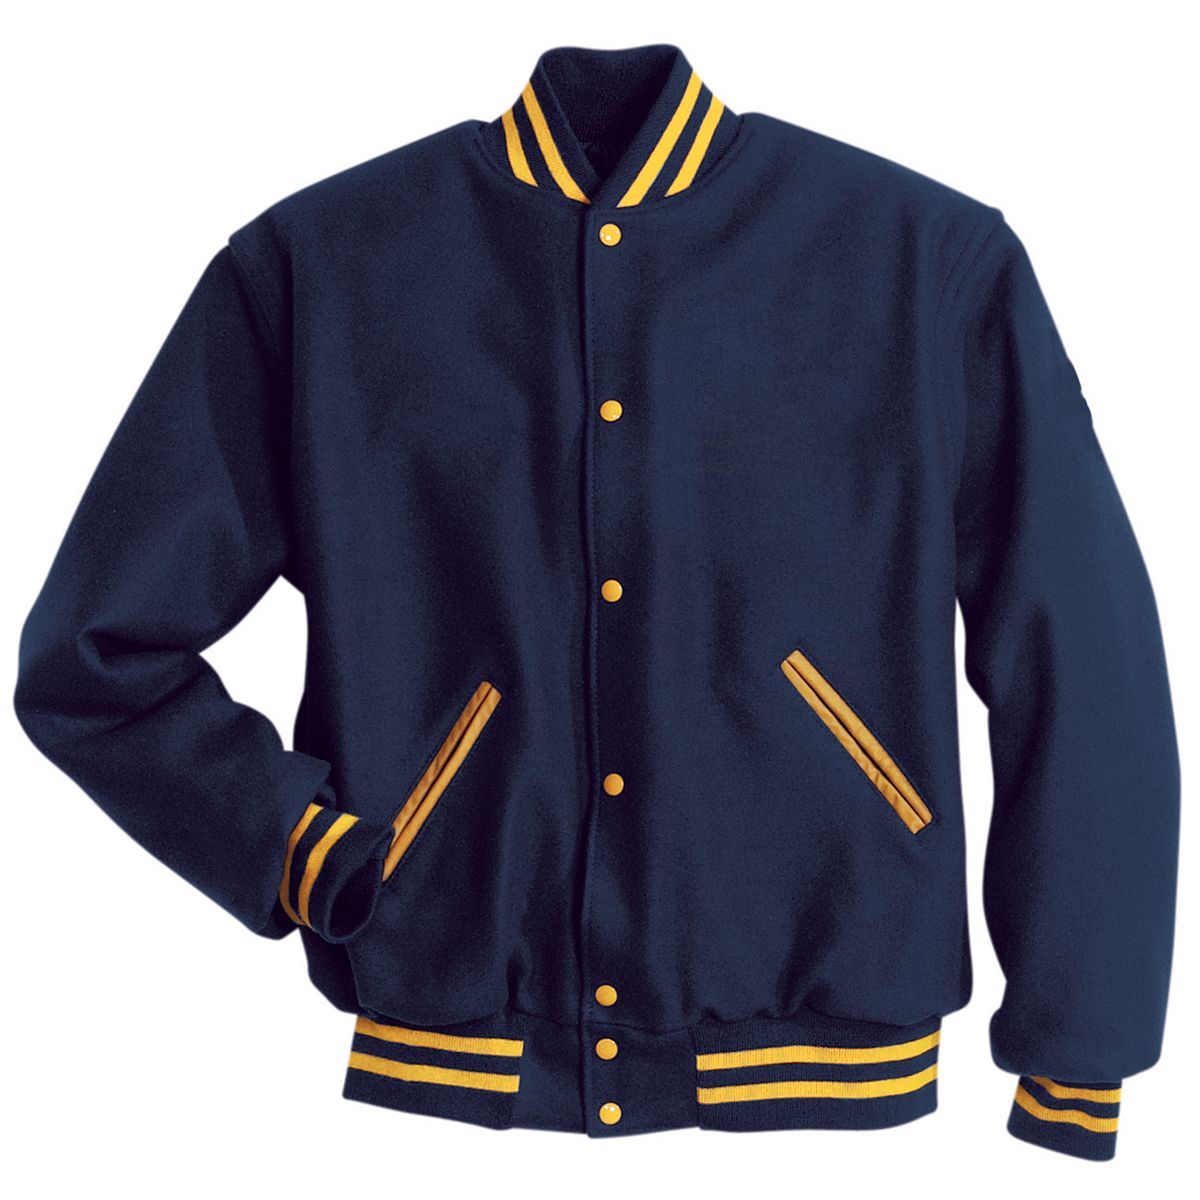 Holloway Letterman Jacket in Dark Navy/Light Gold  -Part of the Adult, Adult-Jacket, Holloway, Outerwear product lines at KanaleyCreations.com